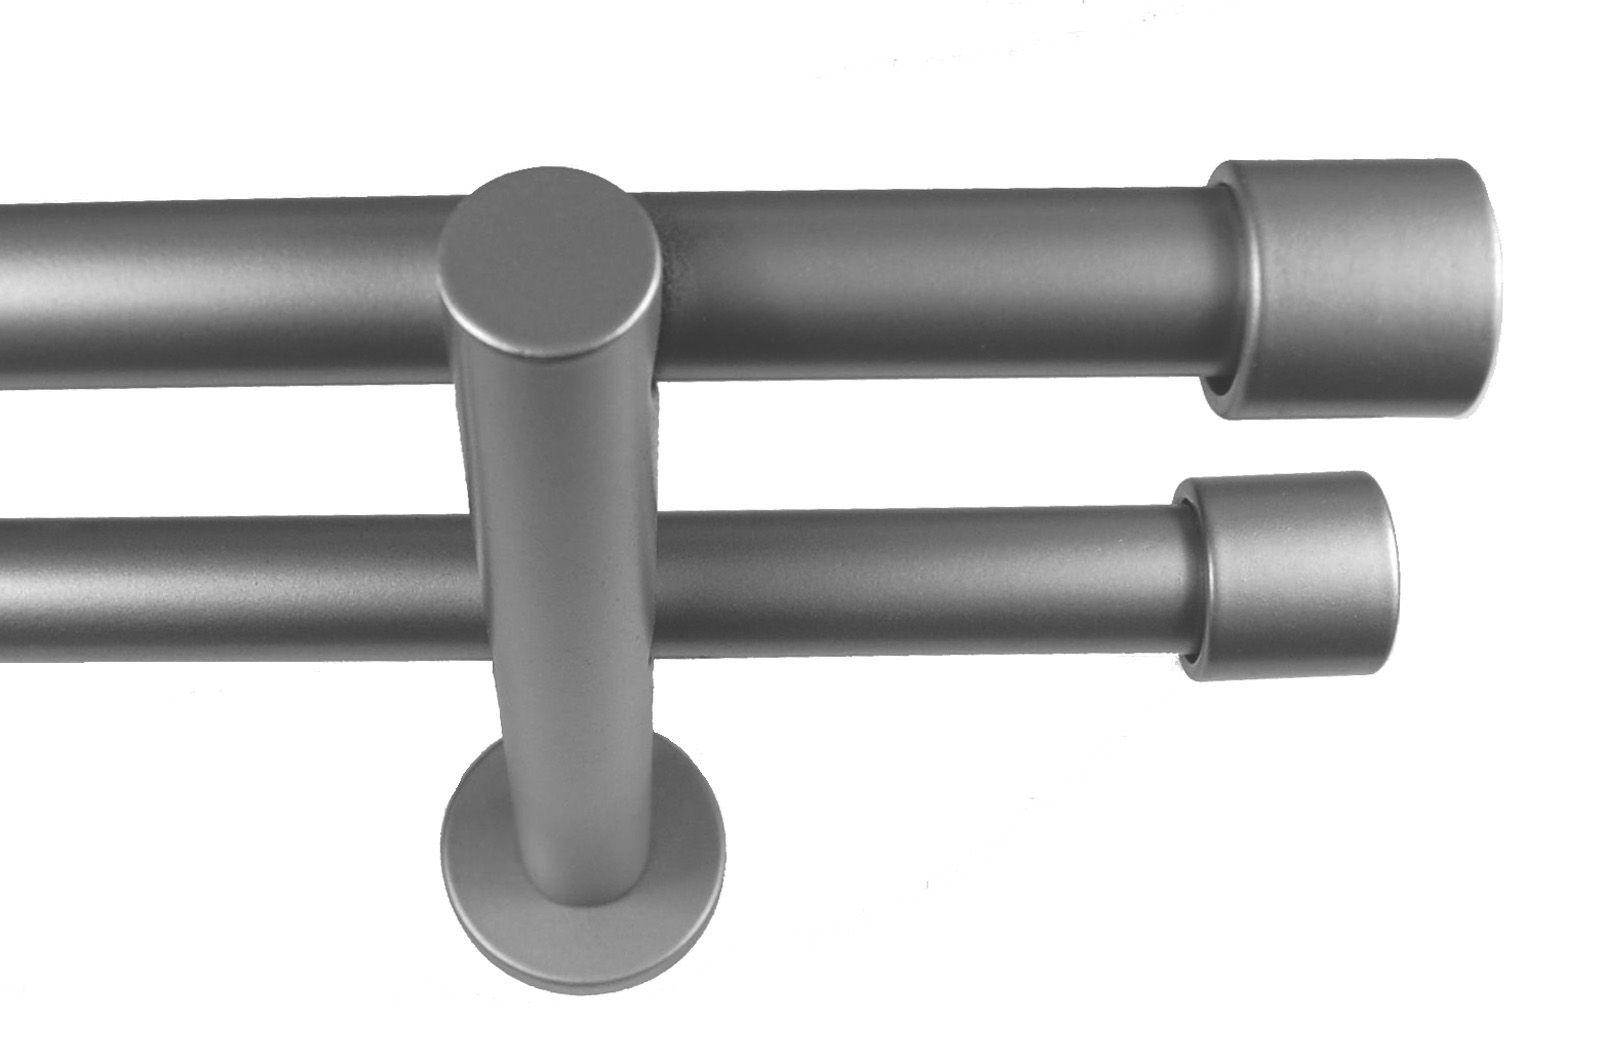 BCL Verona Double Curtain Rod, Pewter Finish, 86-inch to 120-inch, 5/8" Diameter Pole